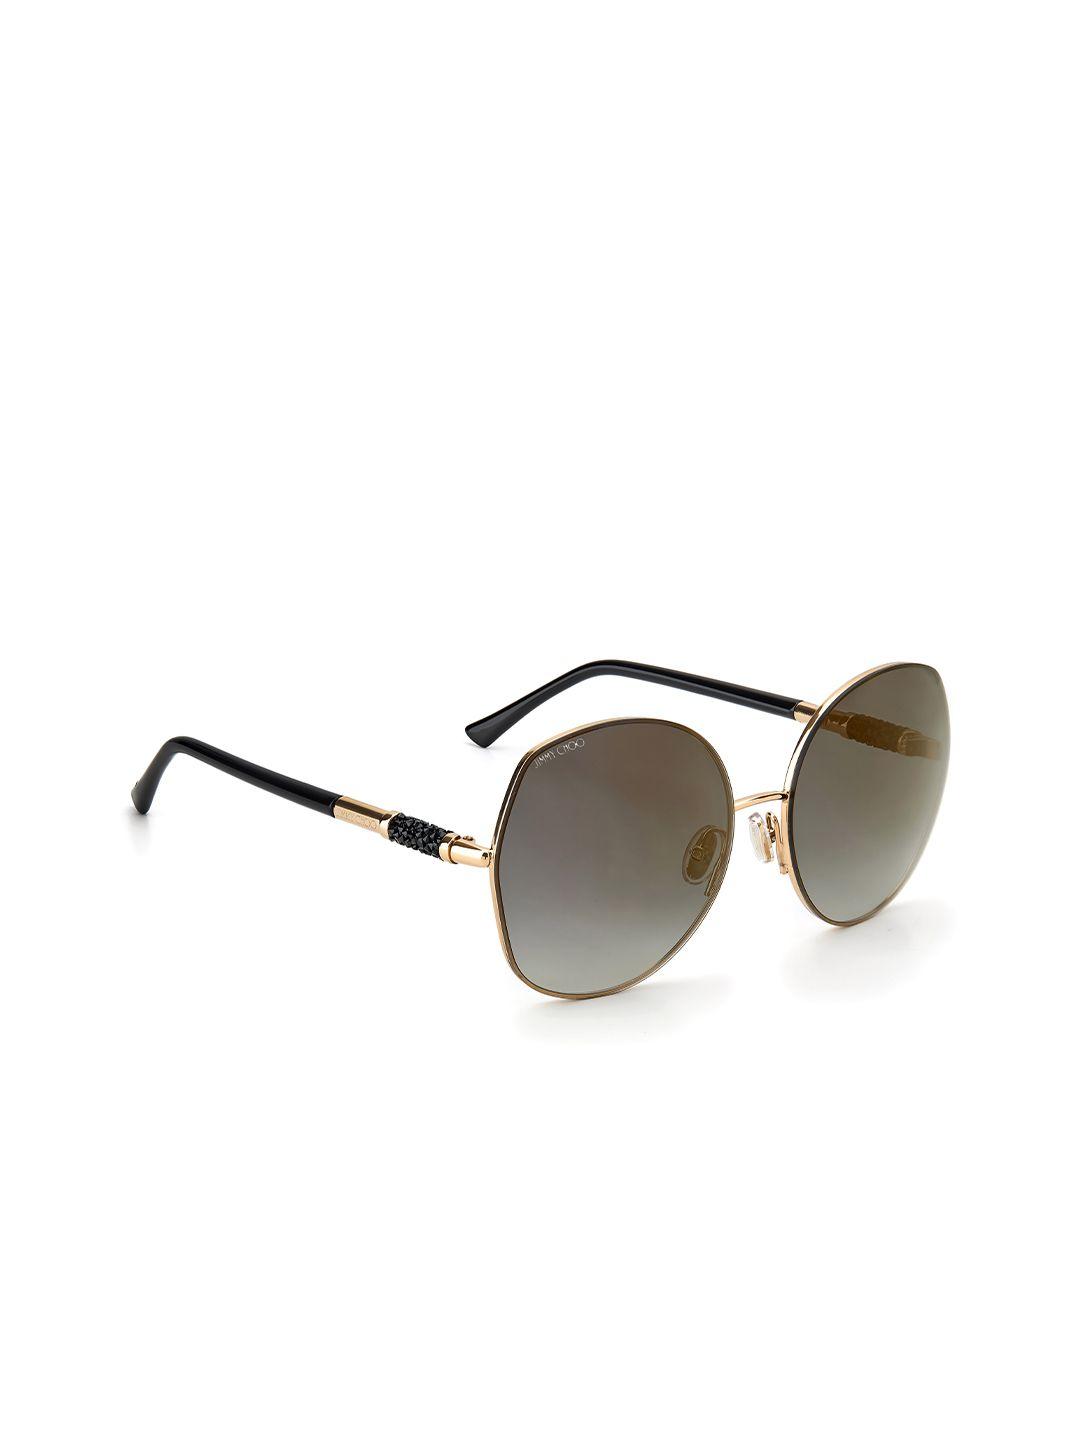 jimmy-choo-women-oversized-sunglasses-with-uv-protected-lens-20373800060fq